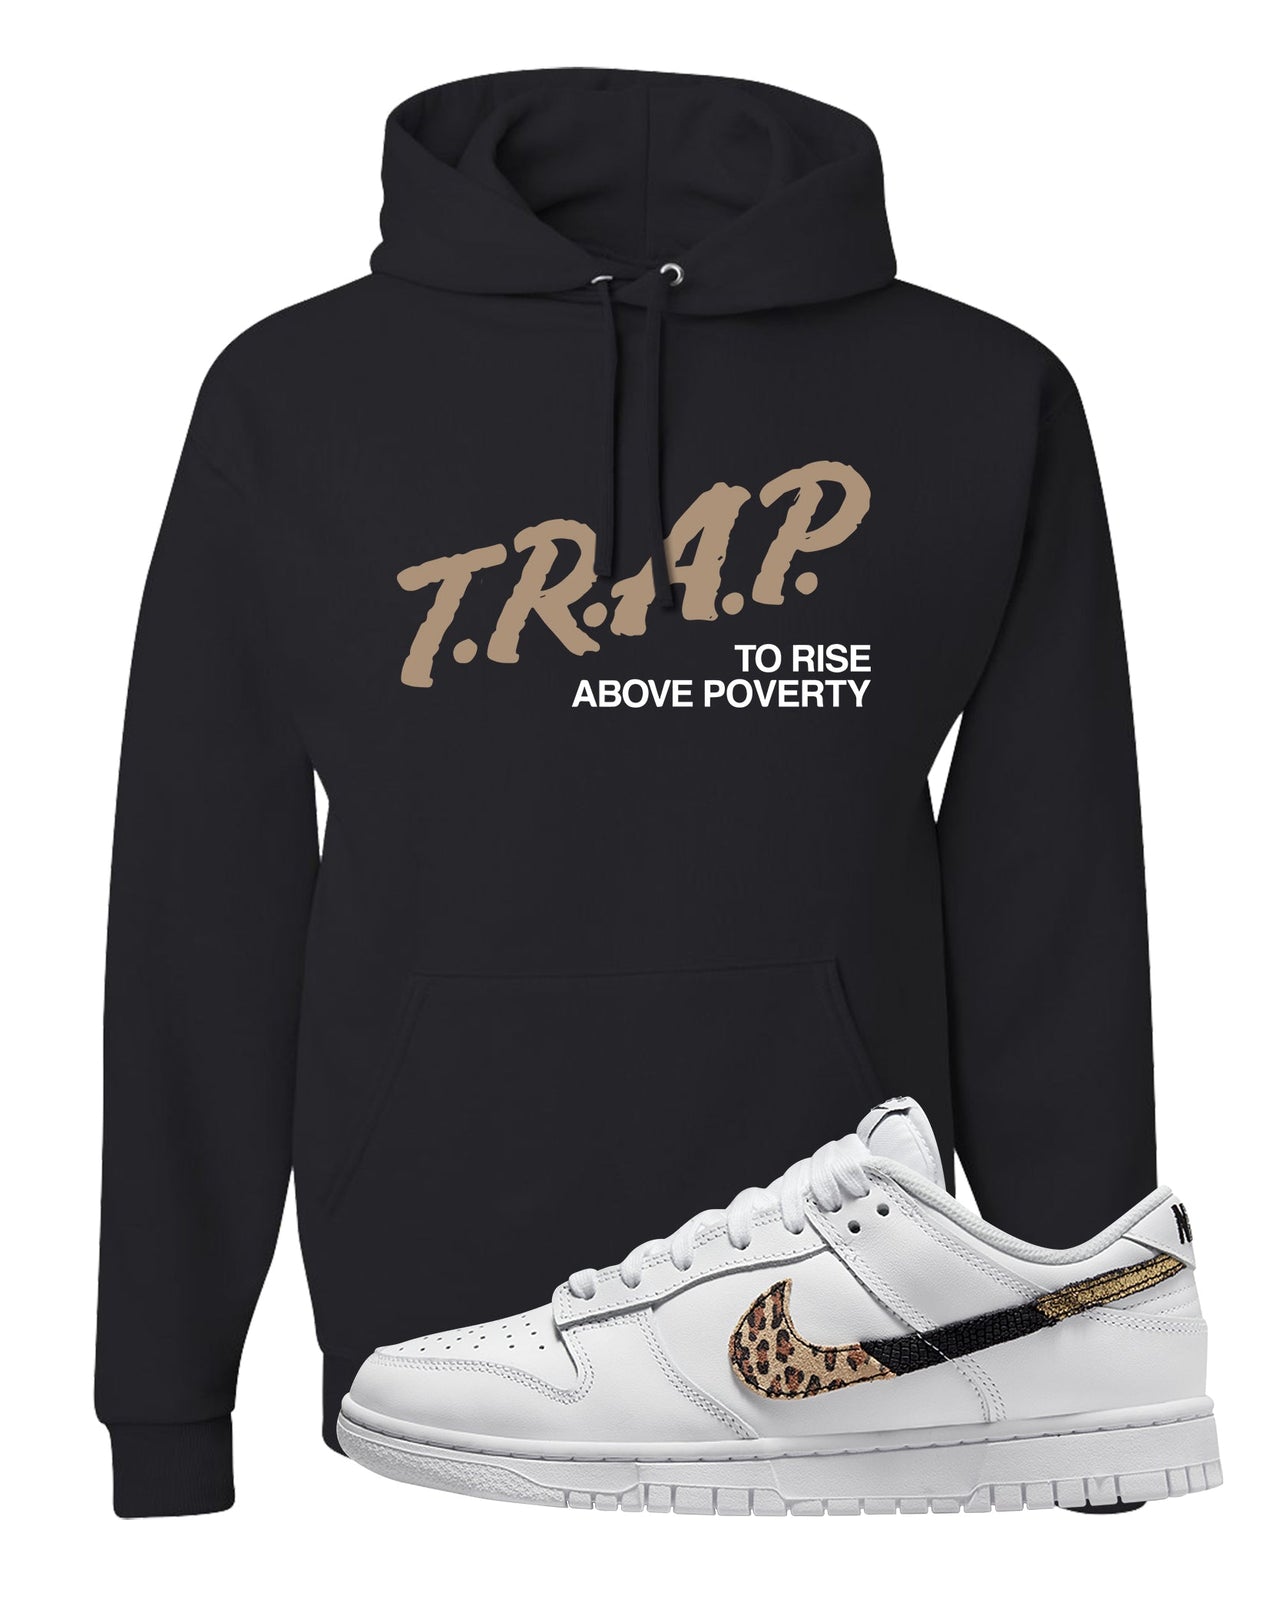 Primal White Leopard Low Dunks Hoodie | Trap To Rise Above Poverty, Black